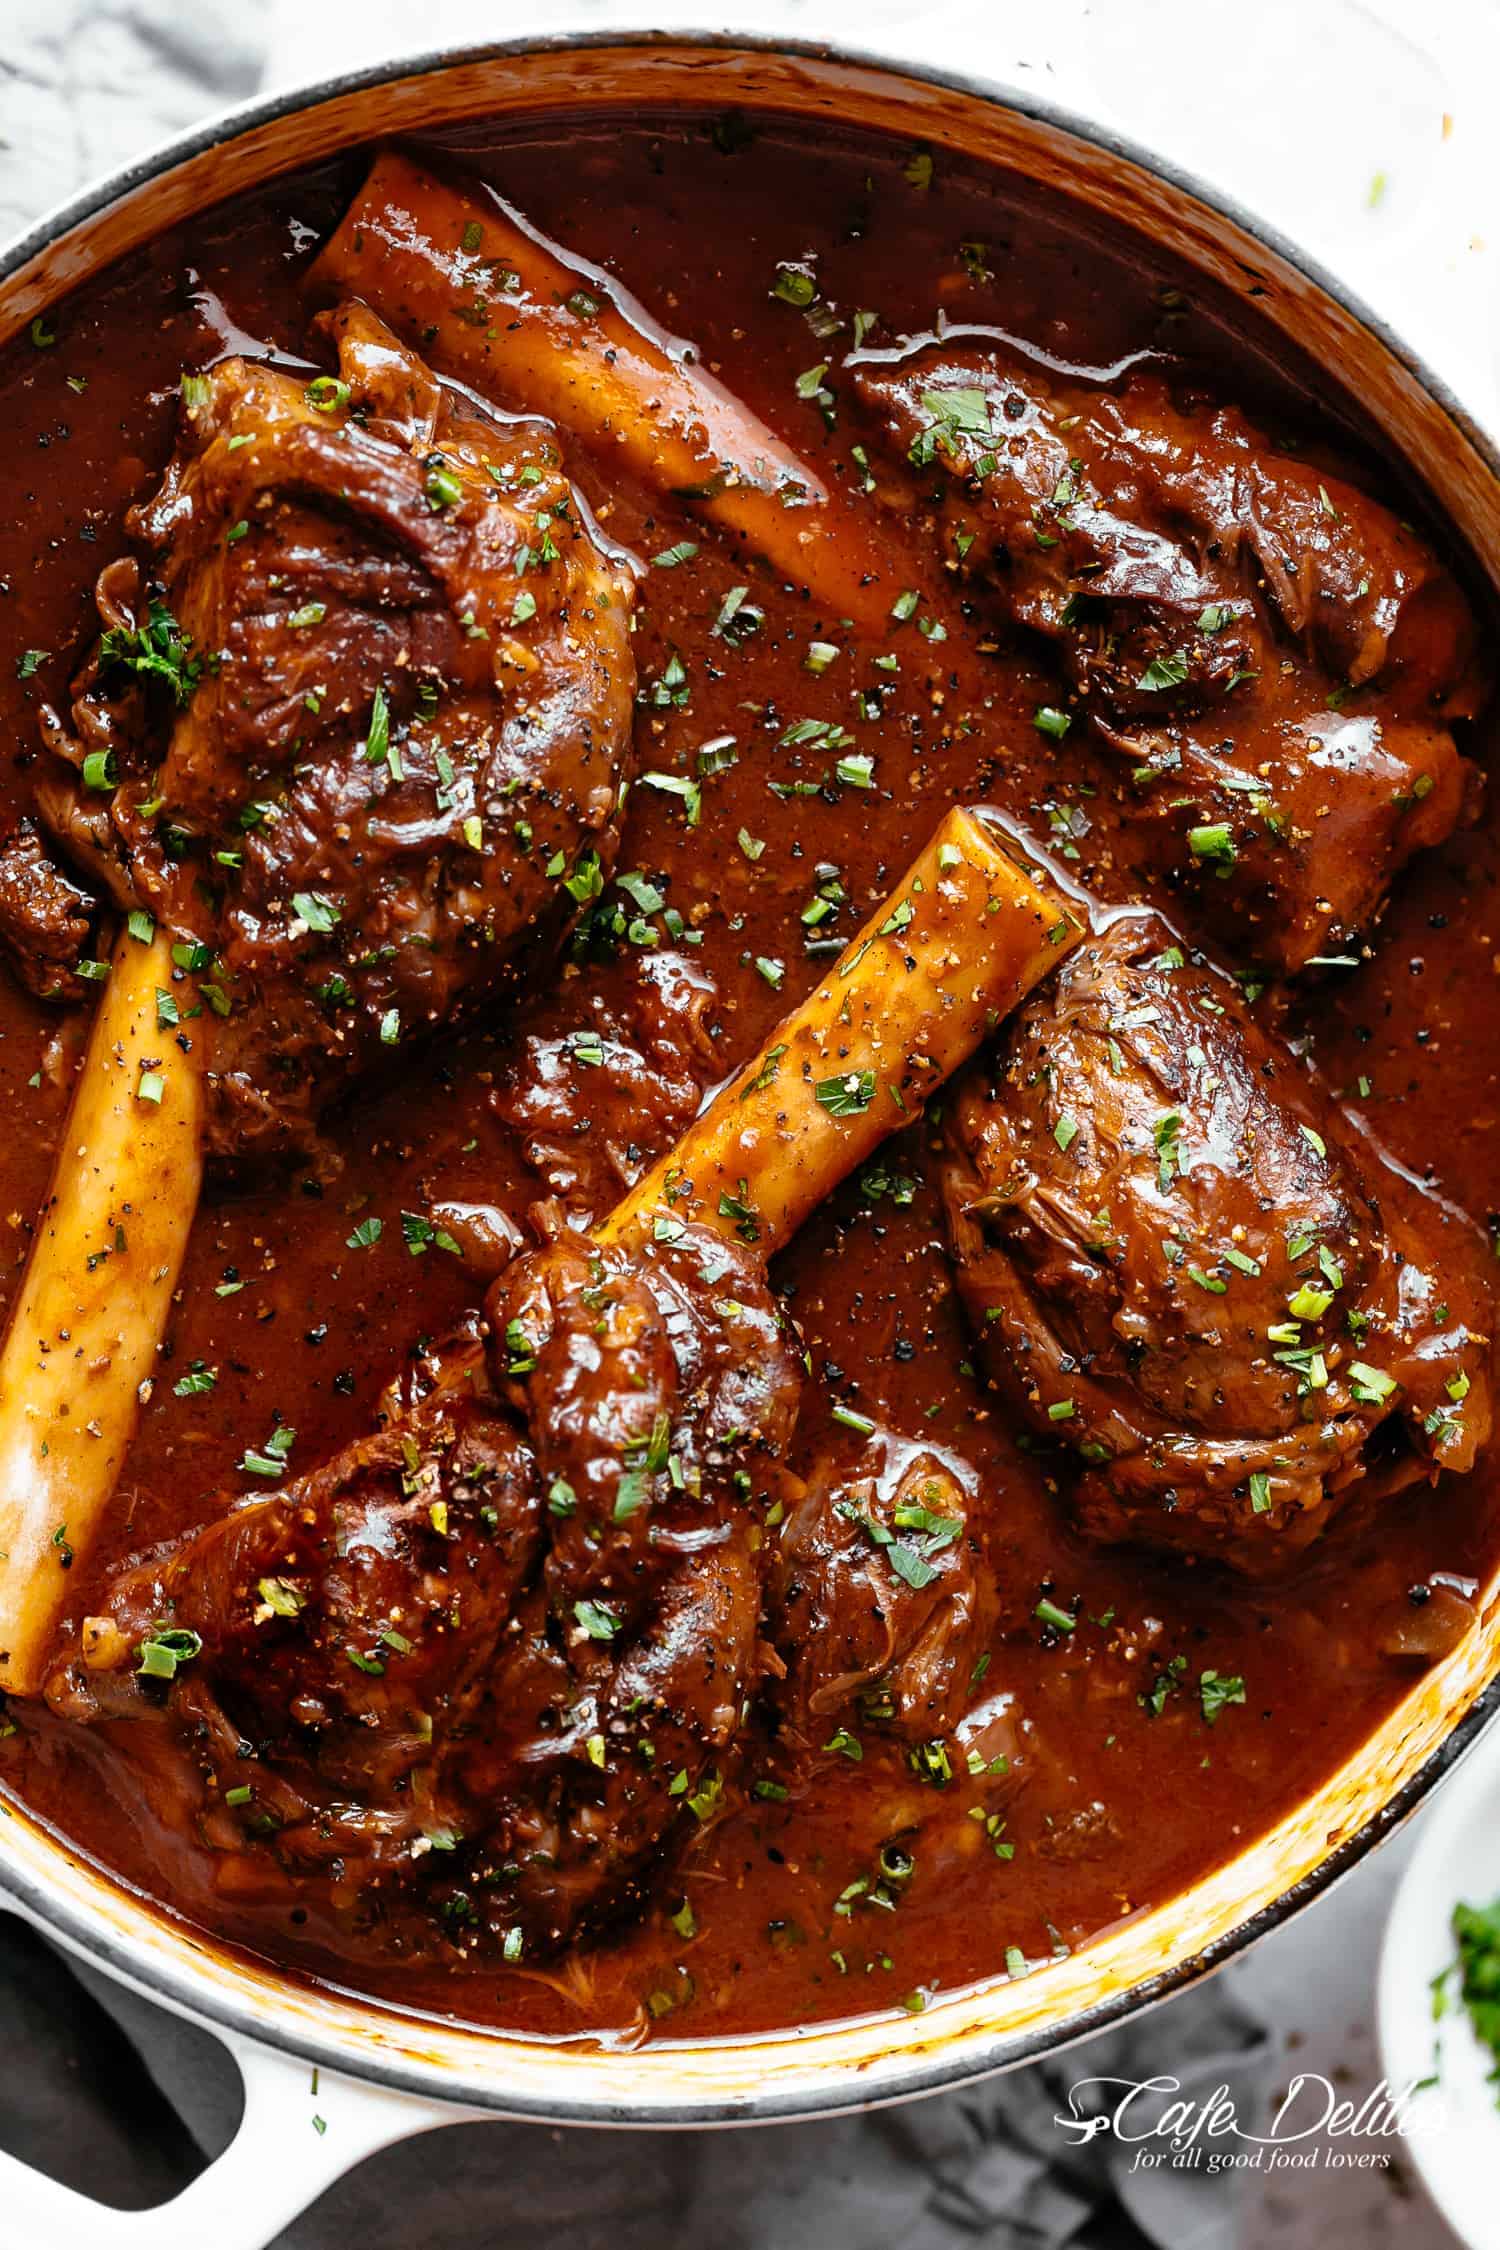 Lamb shanks in a pan in red wine sauce.